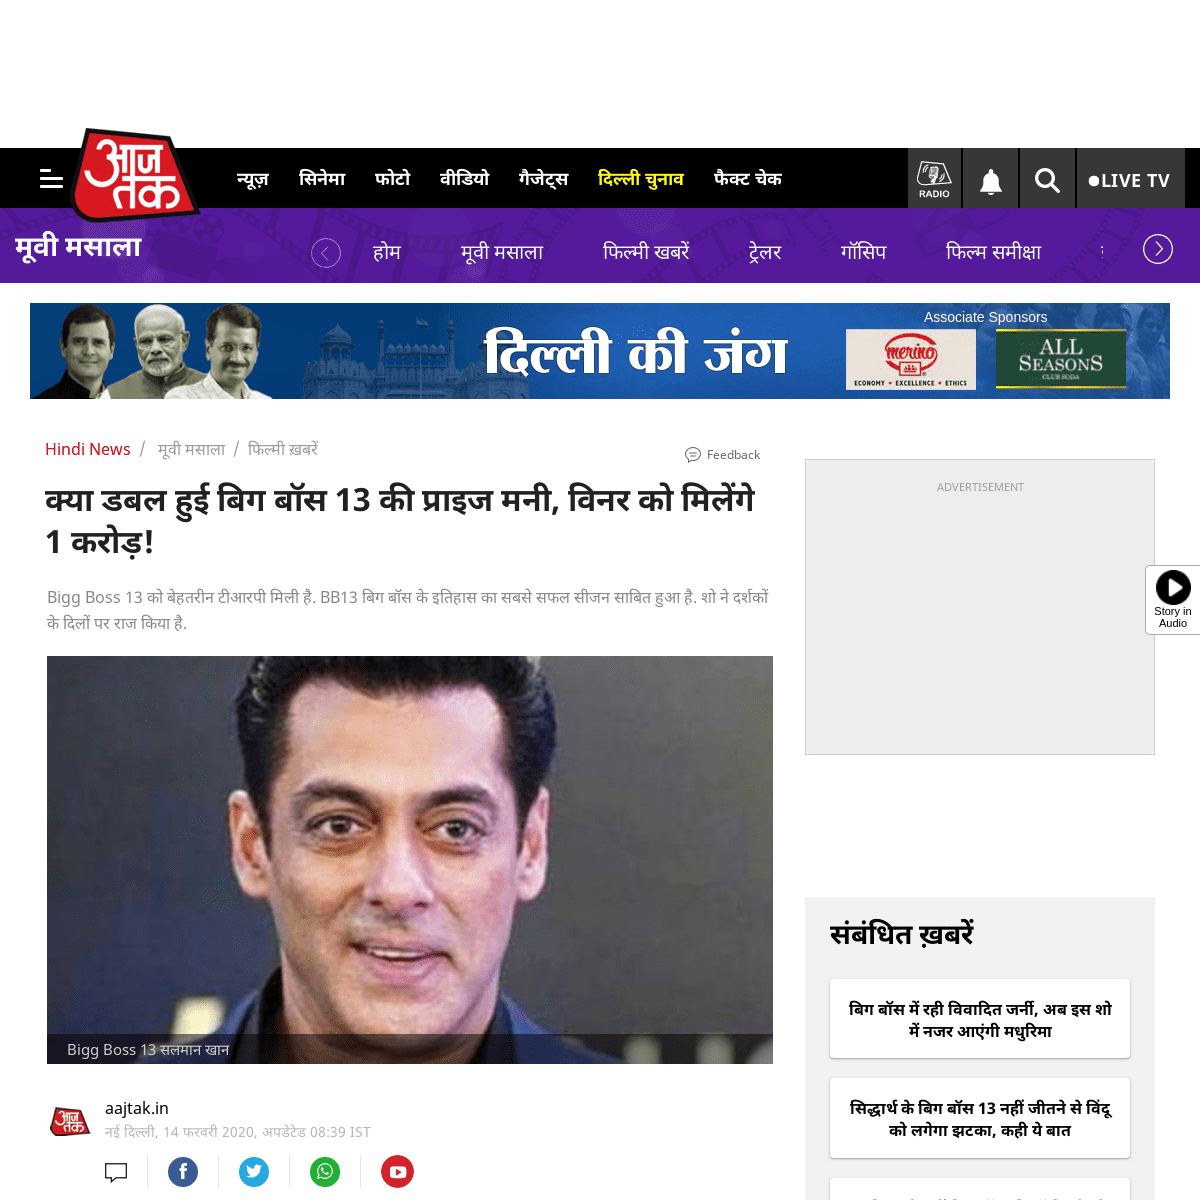 A complete backup of aajtak.intoday.in/story/bigg-boss-13-prize-money-has-doubled-winner-will-get-1-crore-rupee-salman-khan-tmov